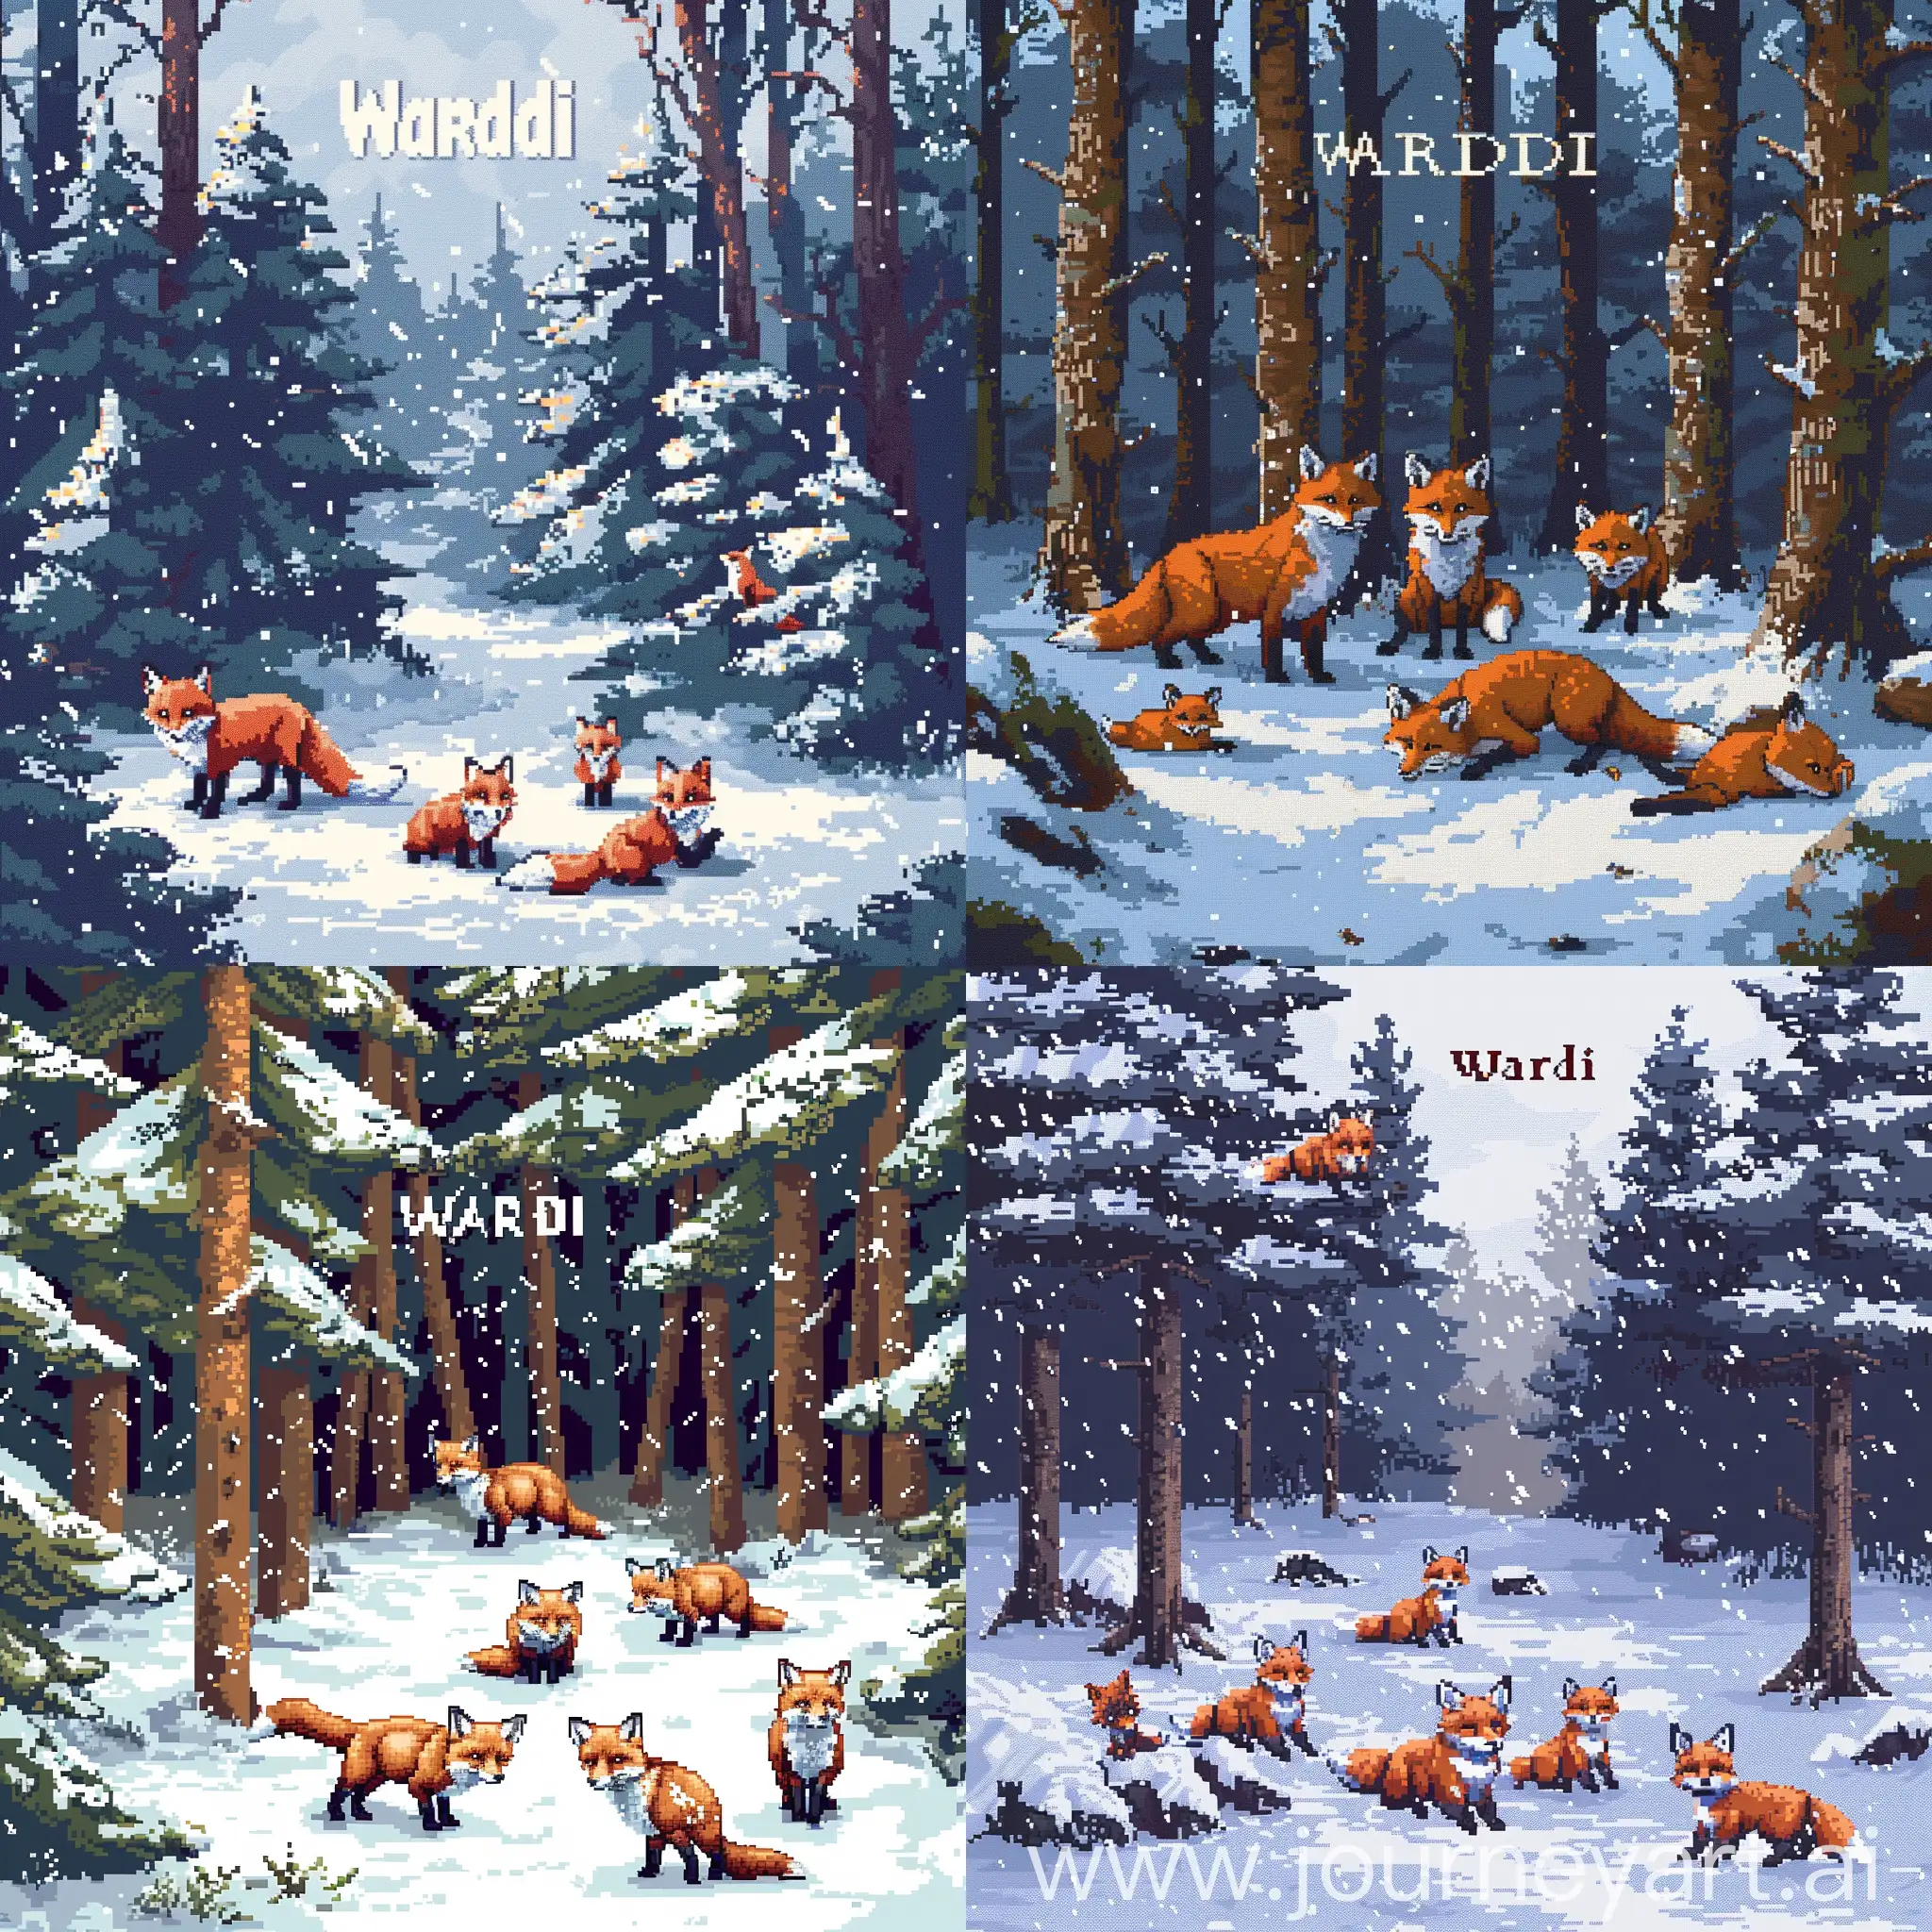 Wardi-Pixel-Art-Enchanting-Snowy-Forest-with-Playful-Foxes